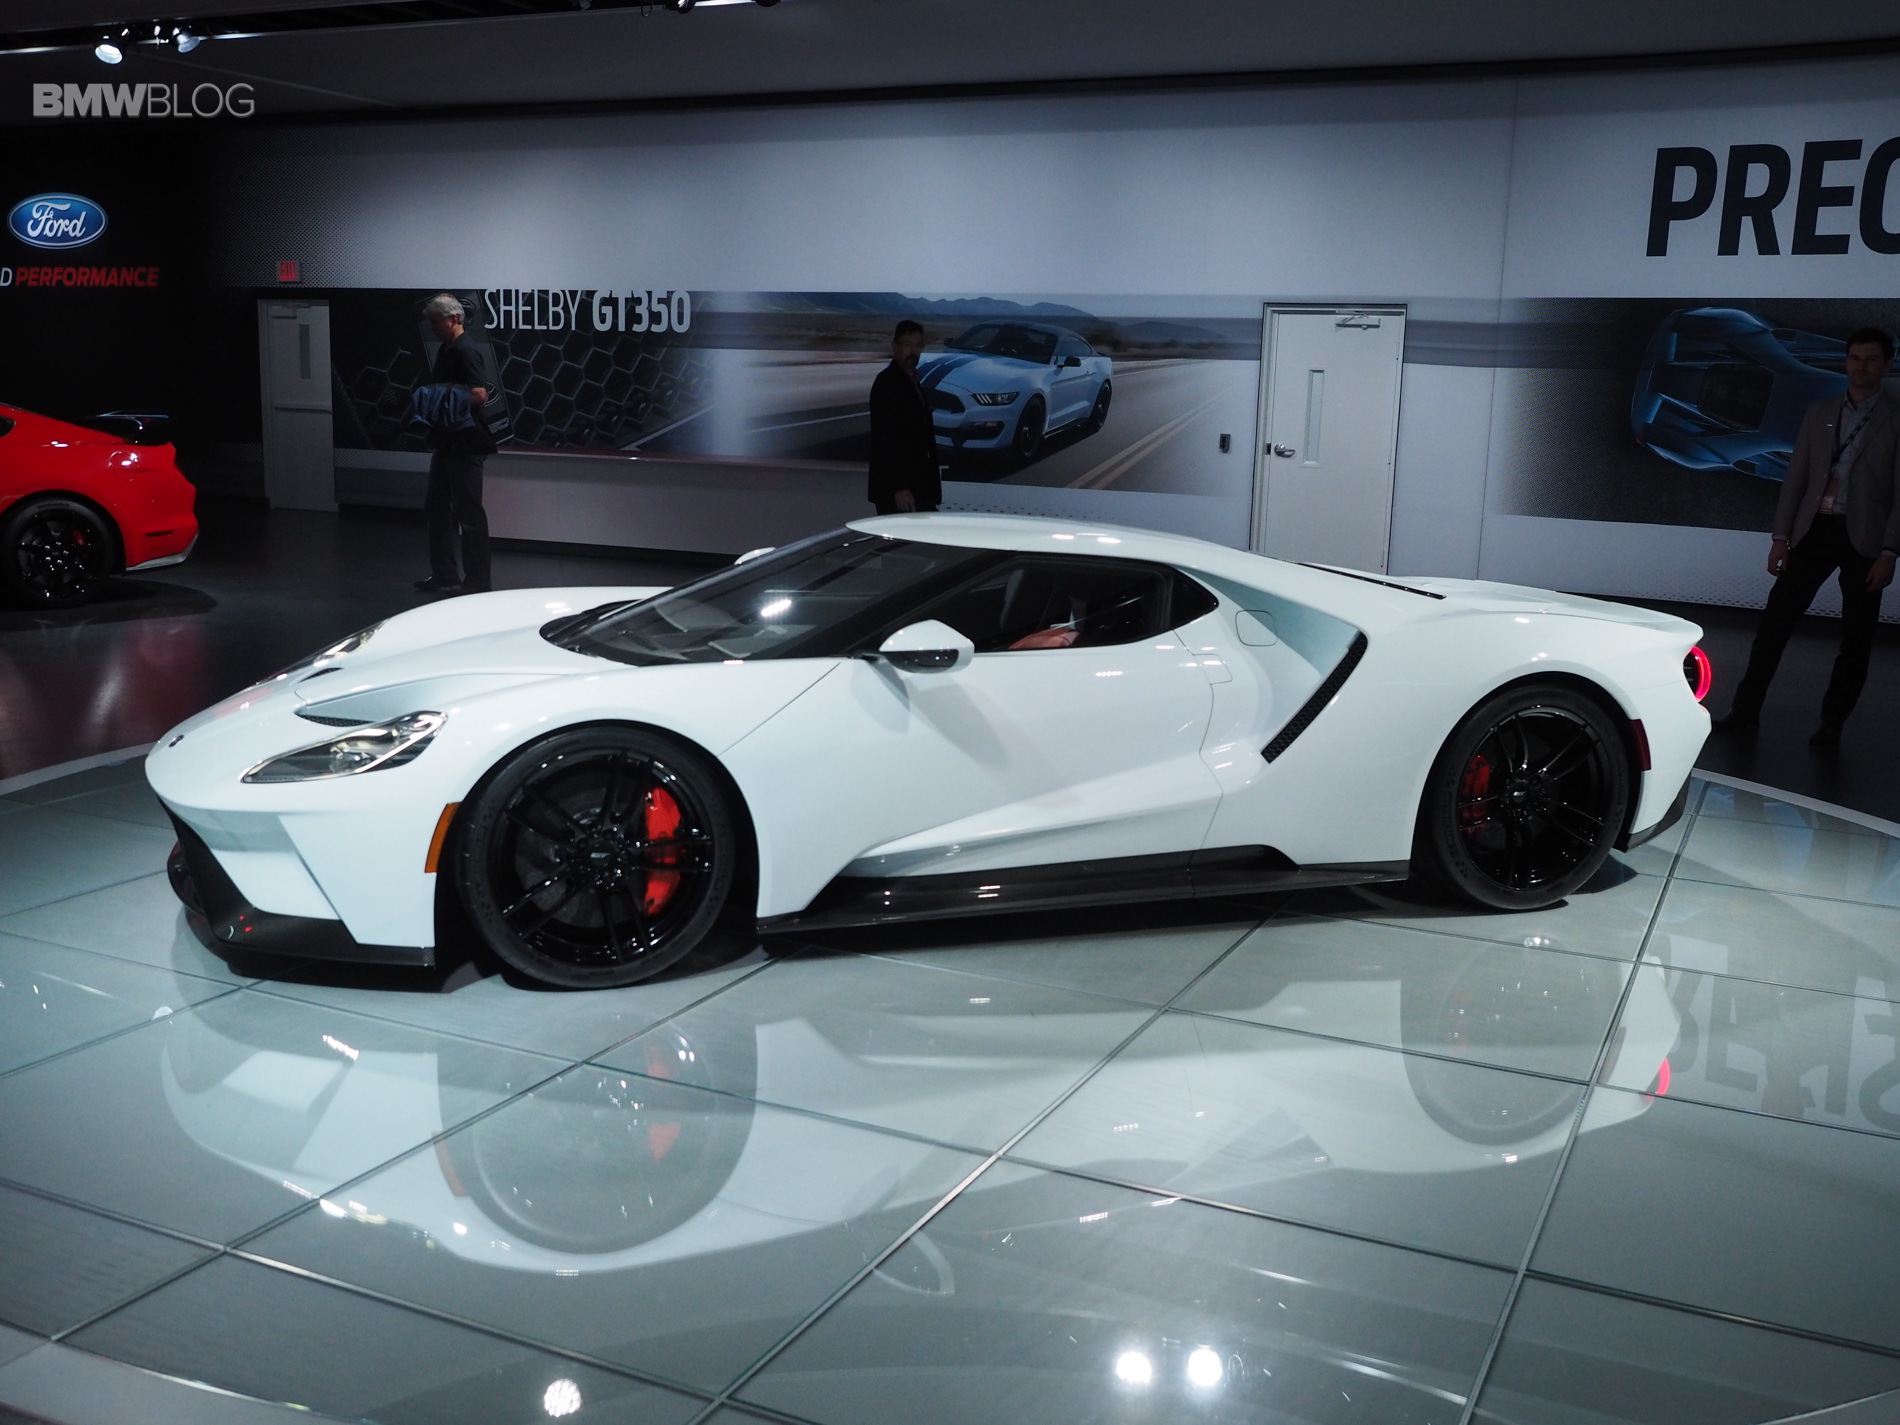 Ford GT 2016 NAIAS images 19